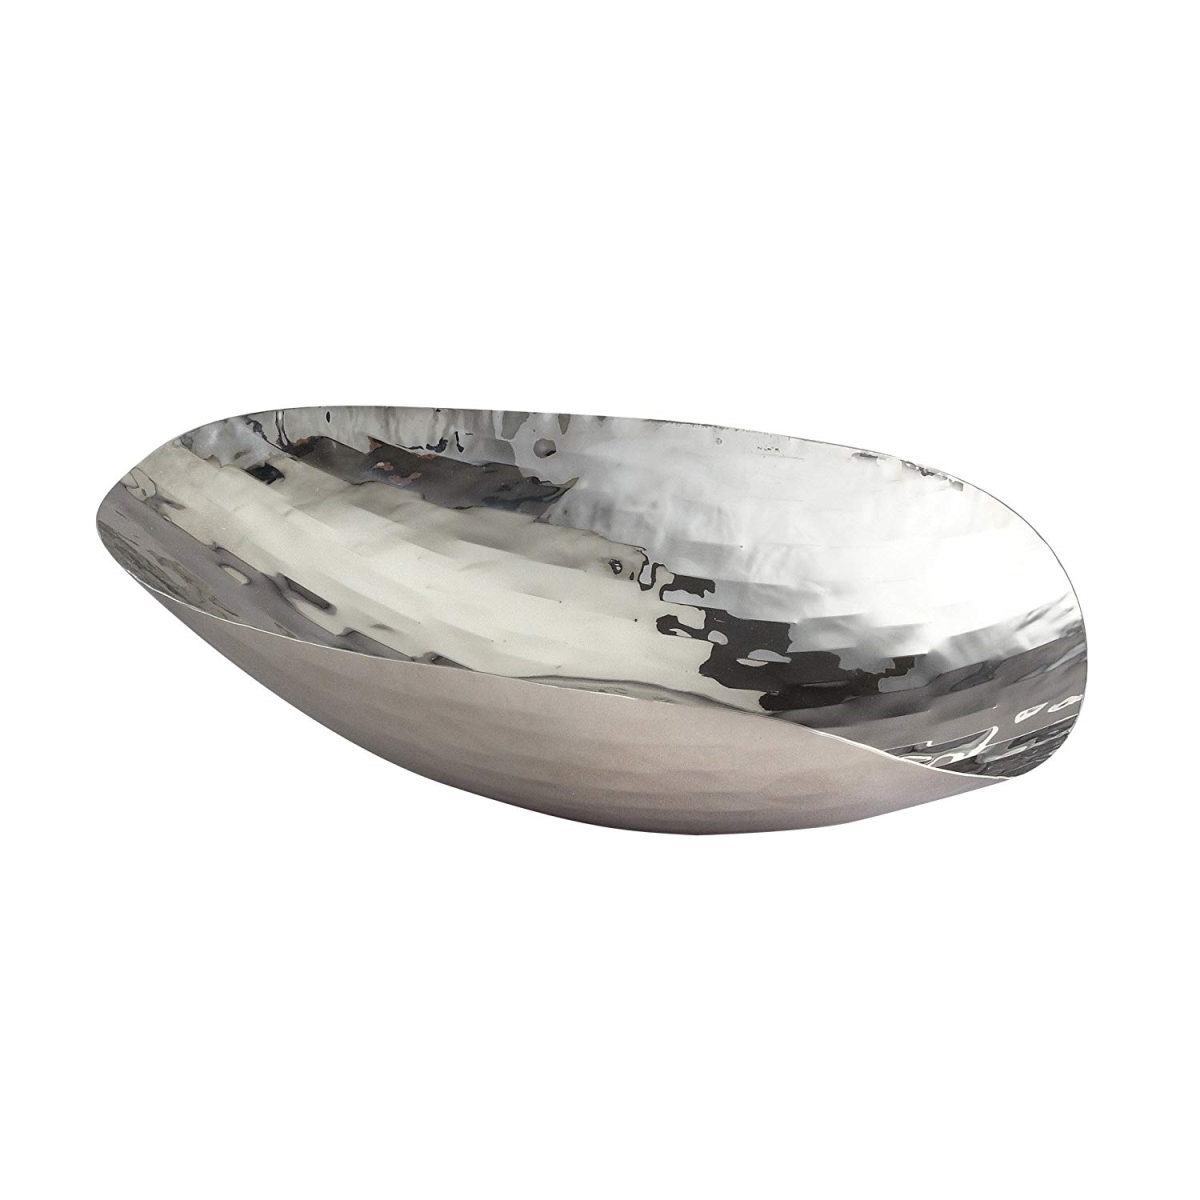 72355 17 X 10.75 X 4.5 In. Large Kasa Bowl